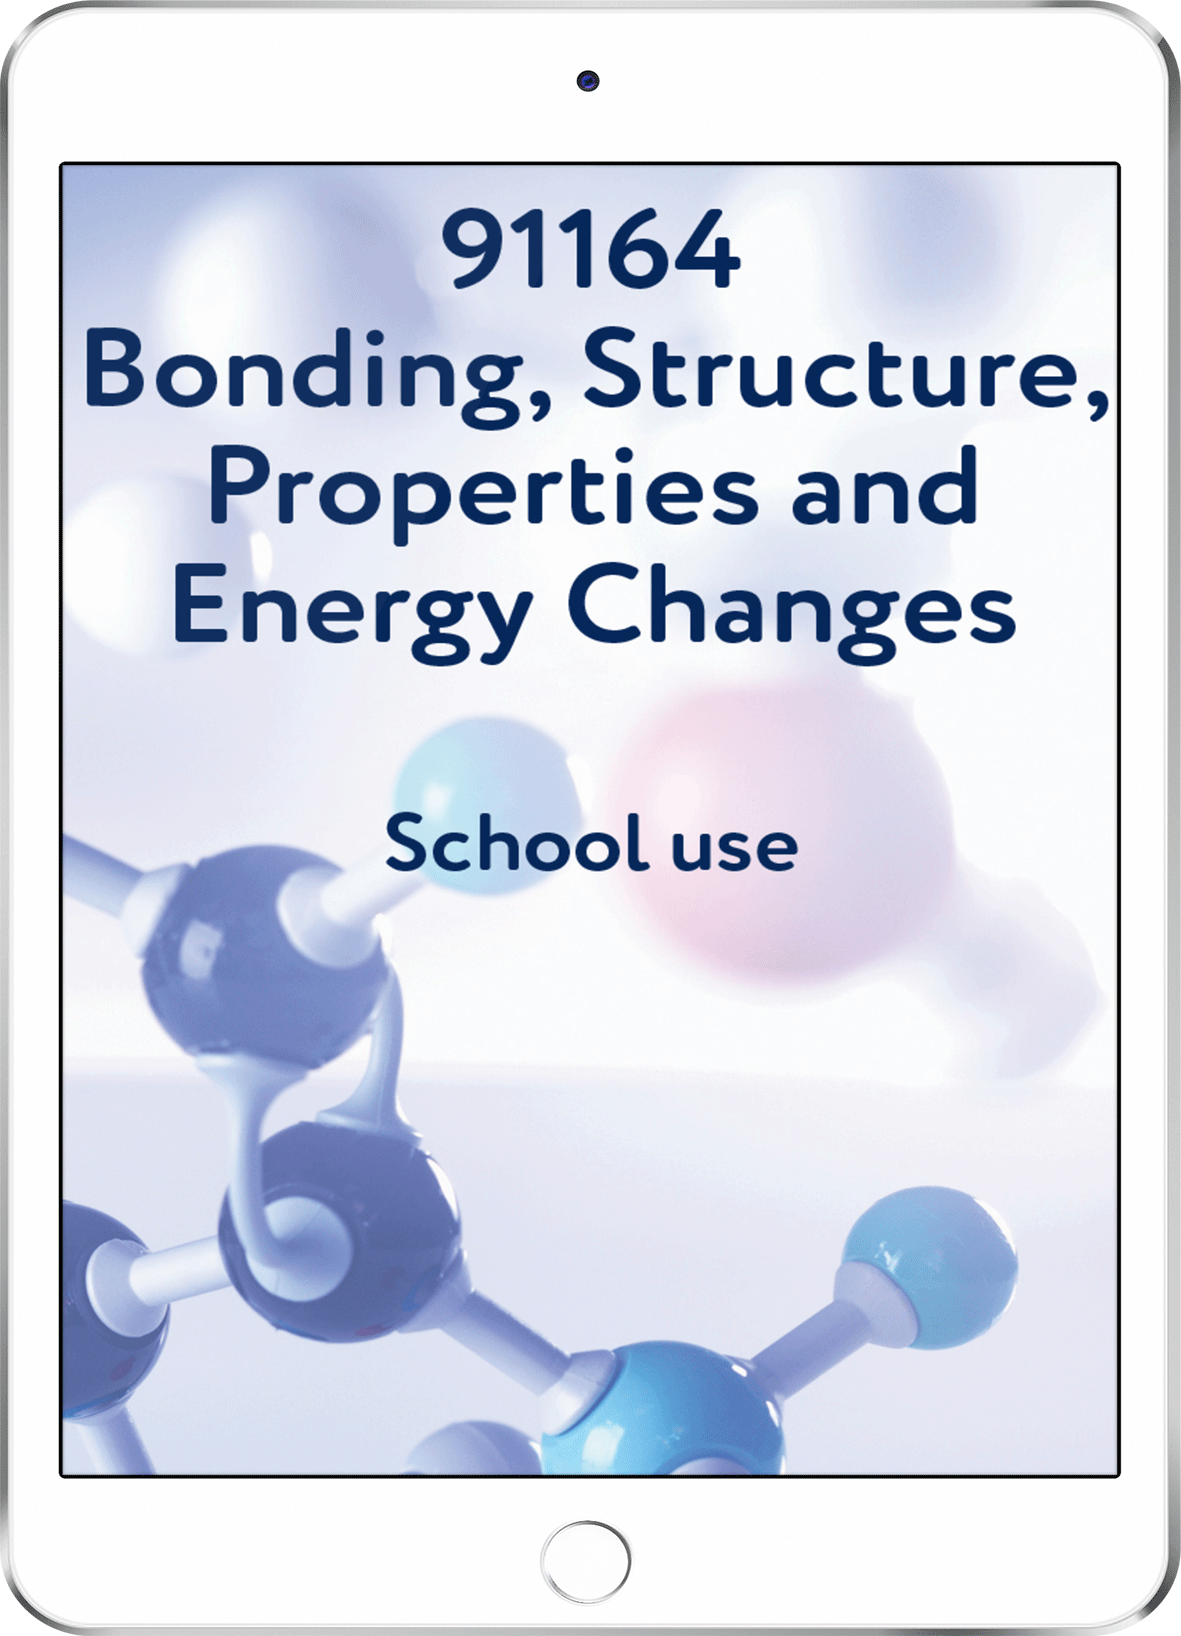 91164 Bonding, Structure, Properties and Energy Changes - School Use